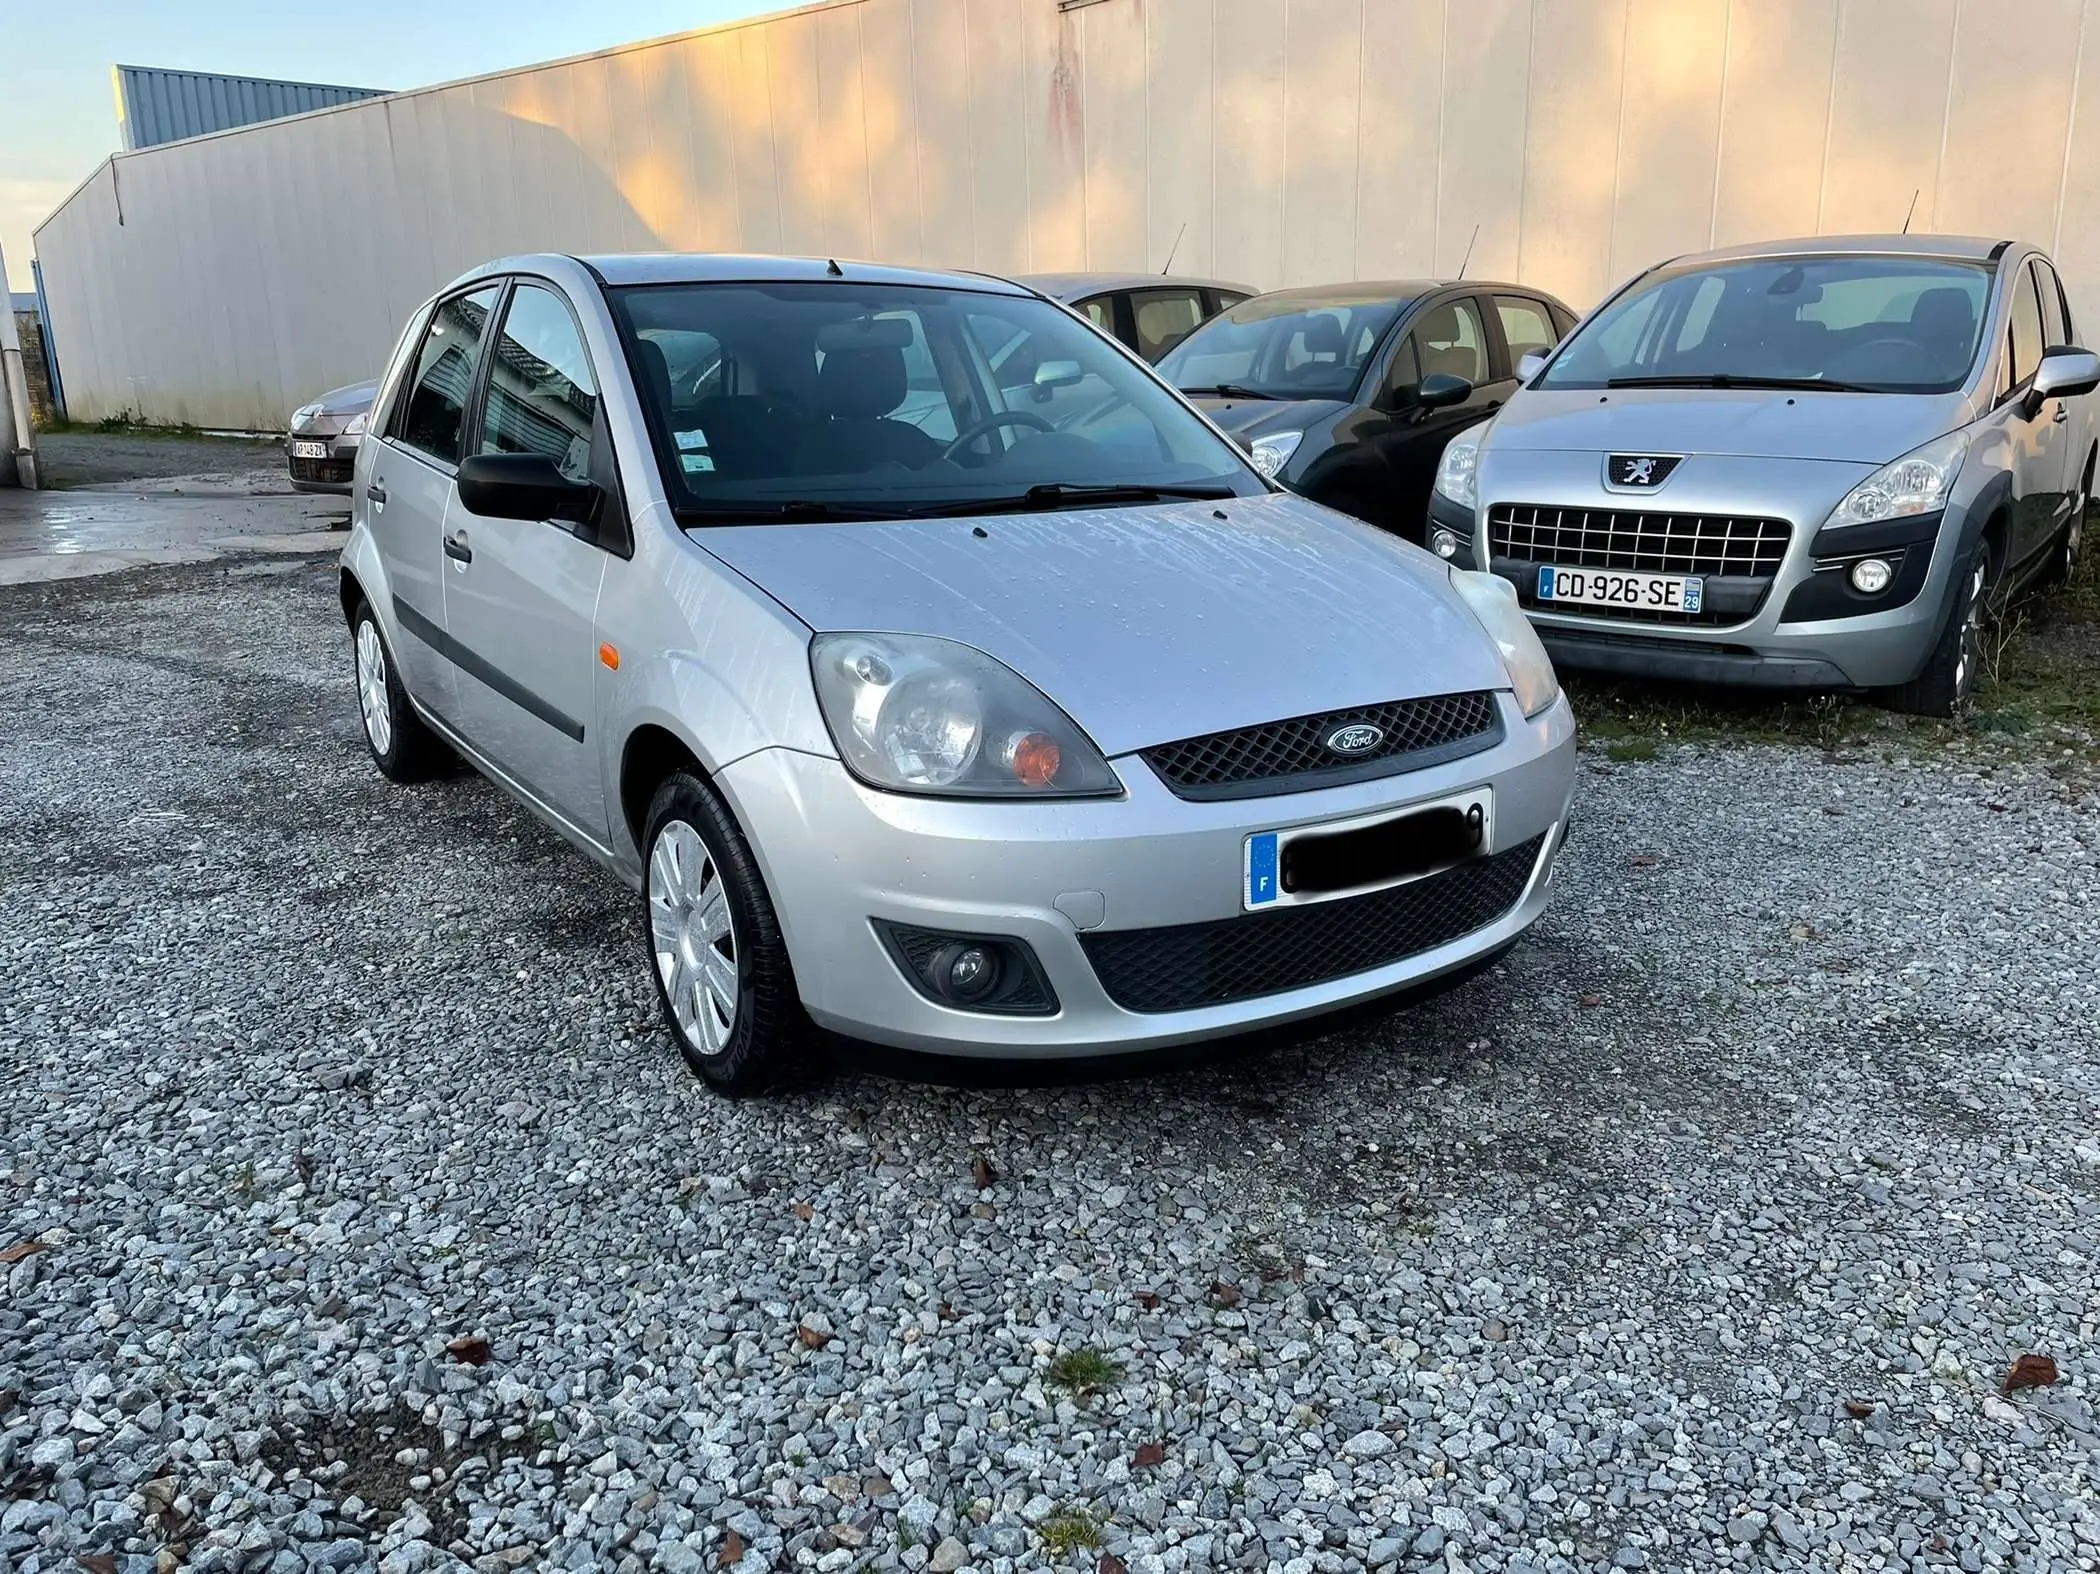 Annonce Ford Fiesta d'occasion : Année 2006, 128845 km